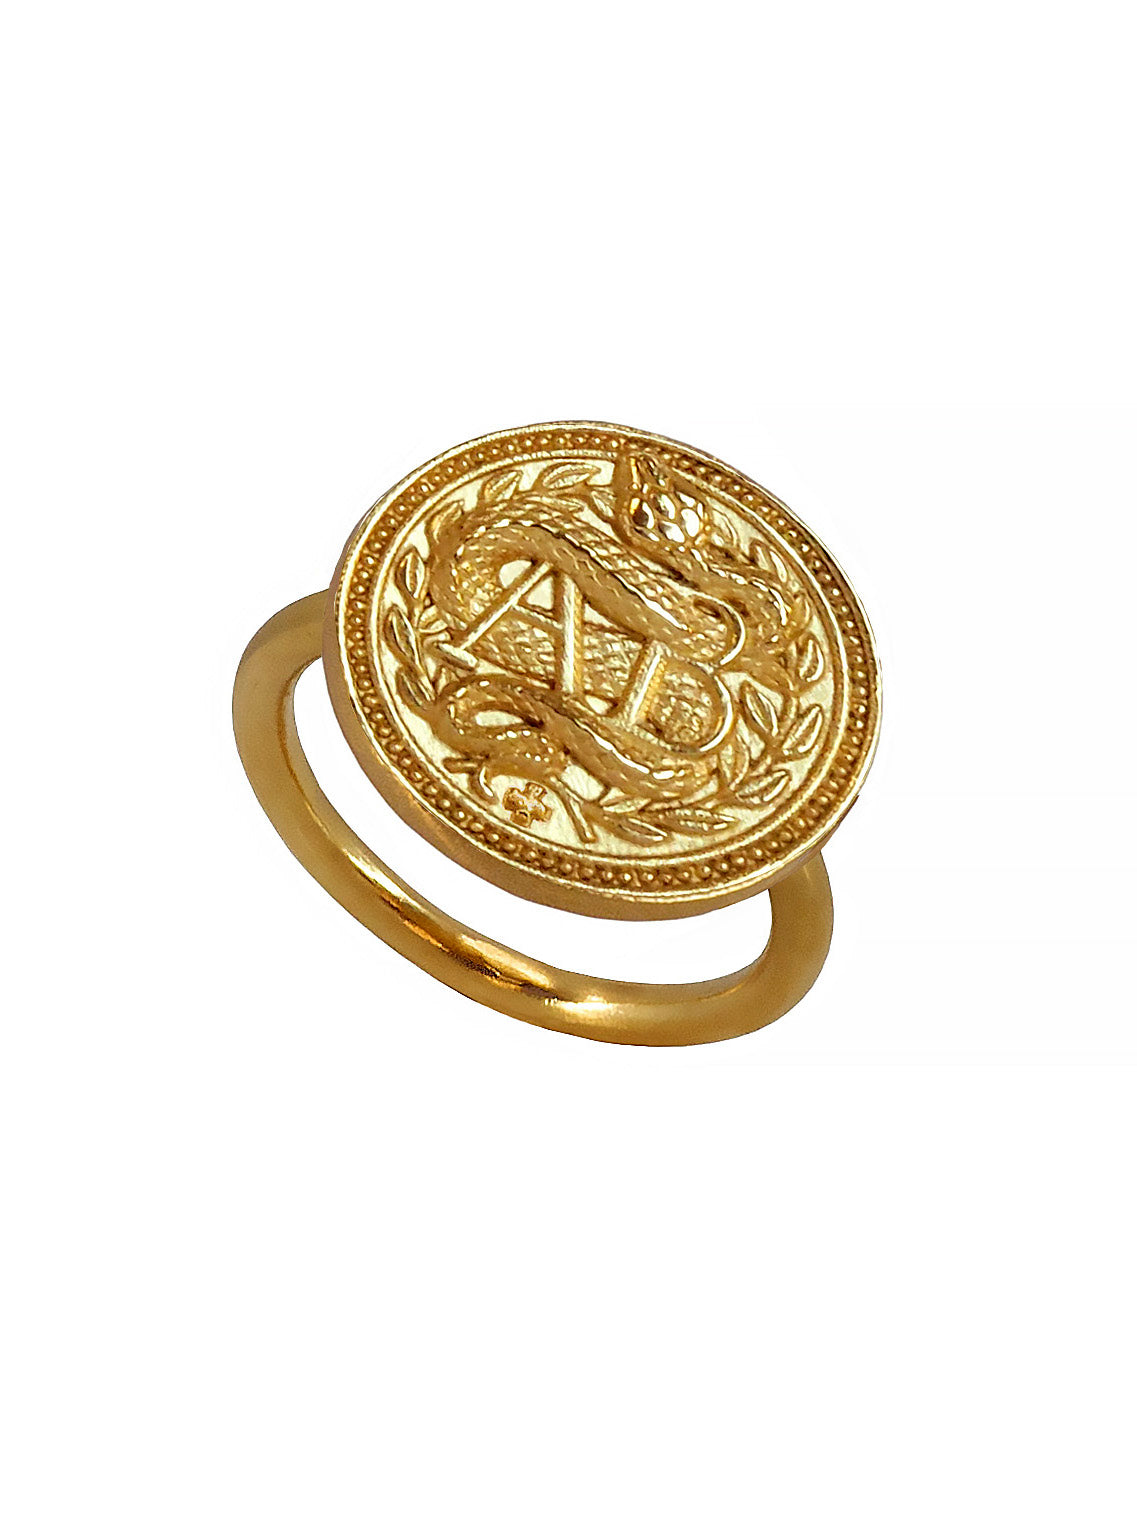 Blood type AB Positive Ring. Gold plated Sterling Silver